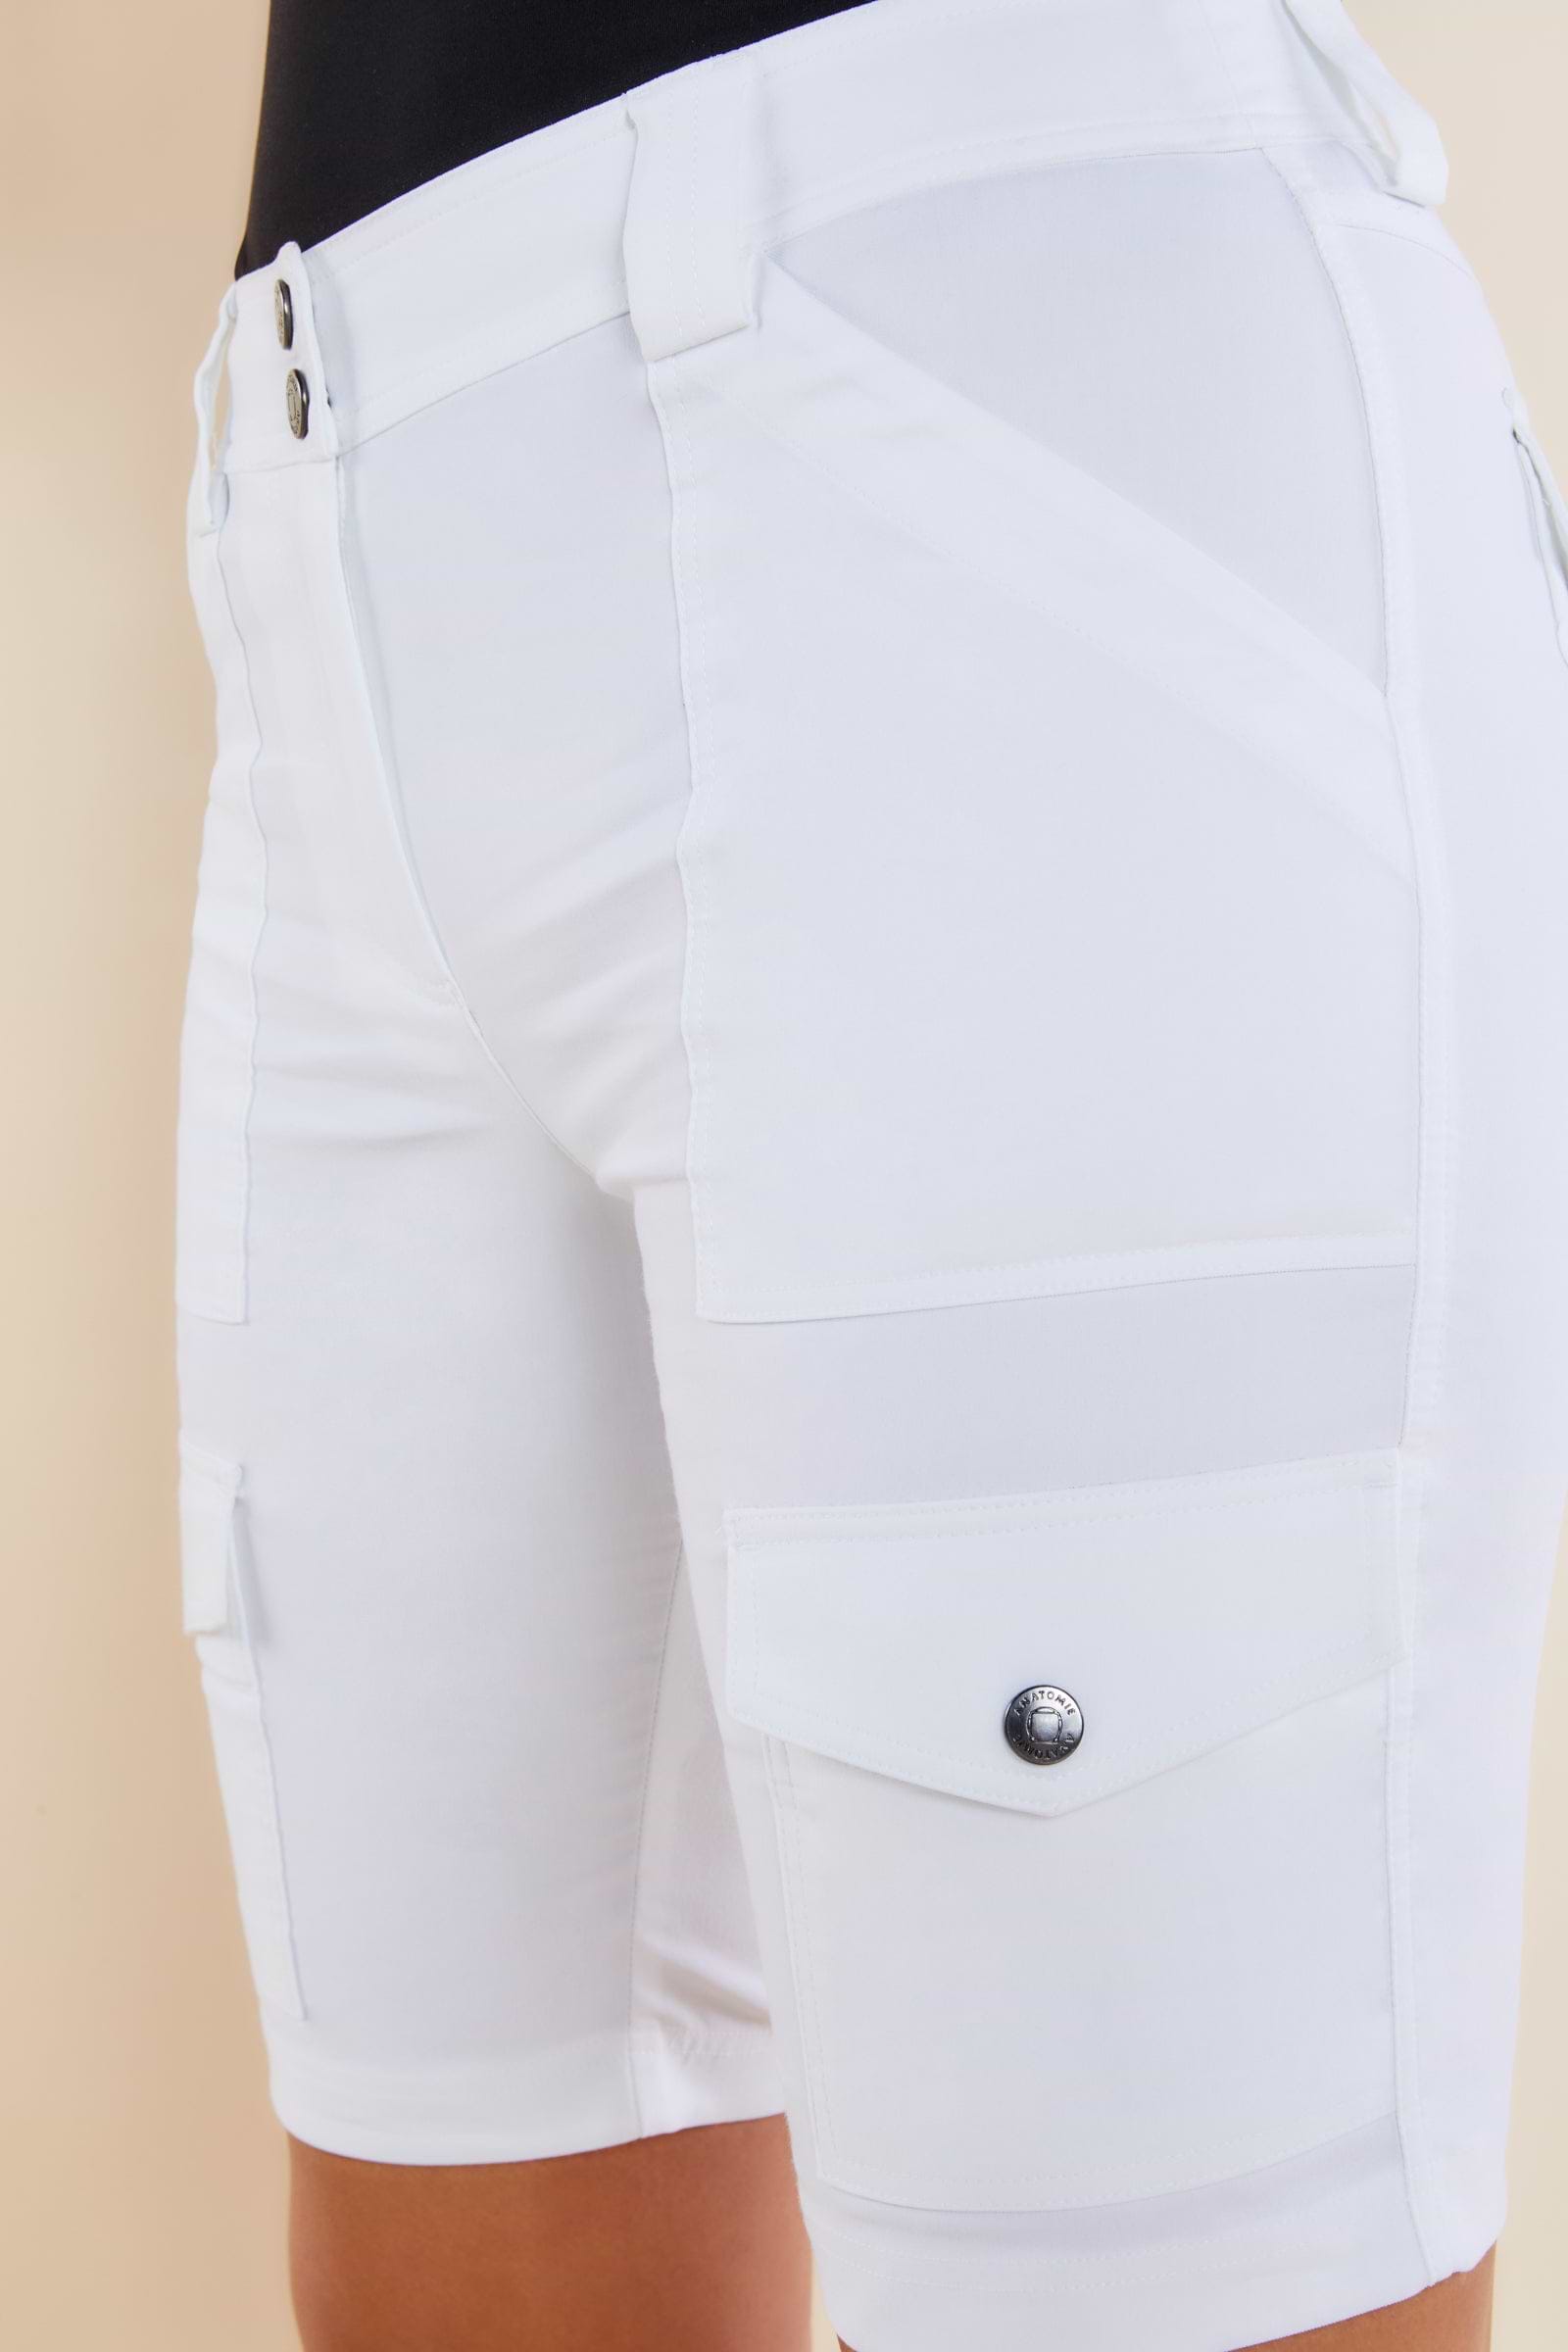 The Best Travel Shorts. Front Details of an Apiedi Shorts in White.